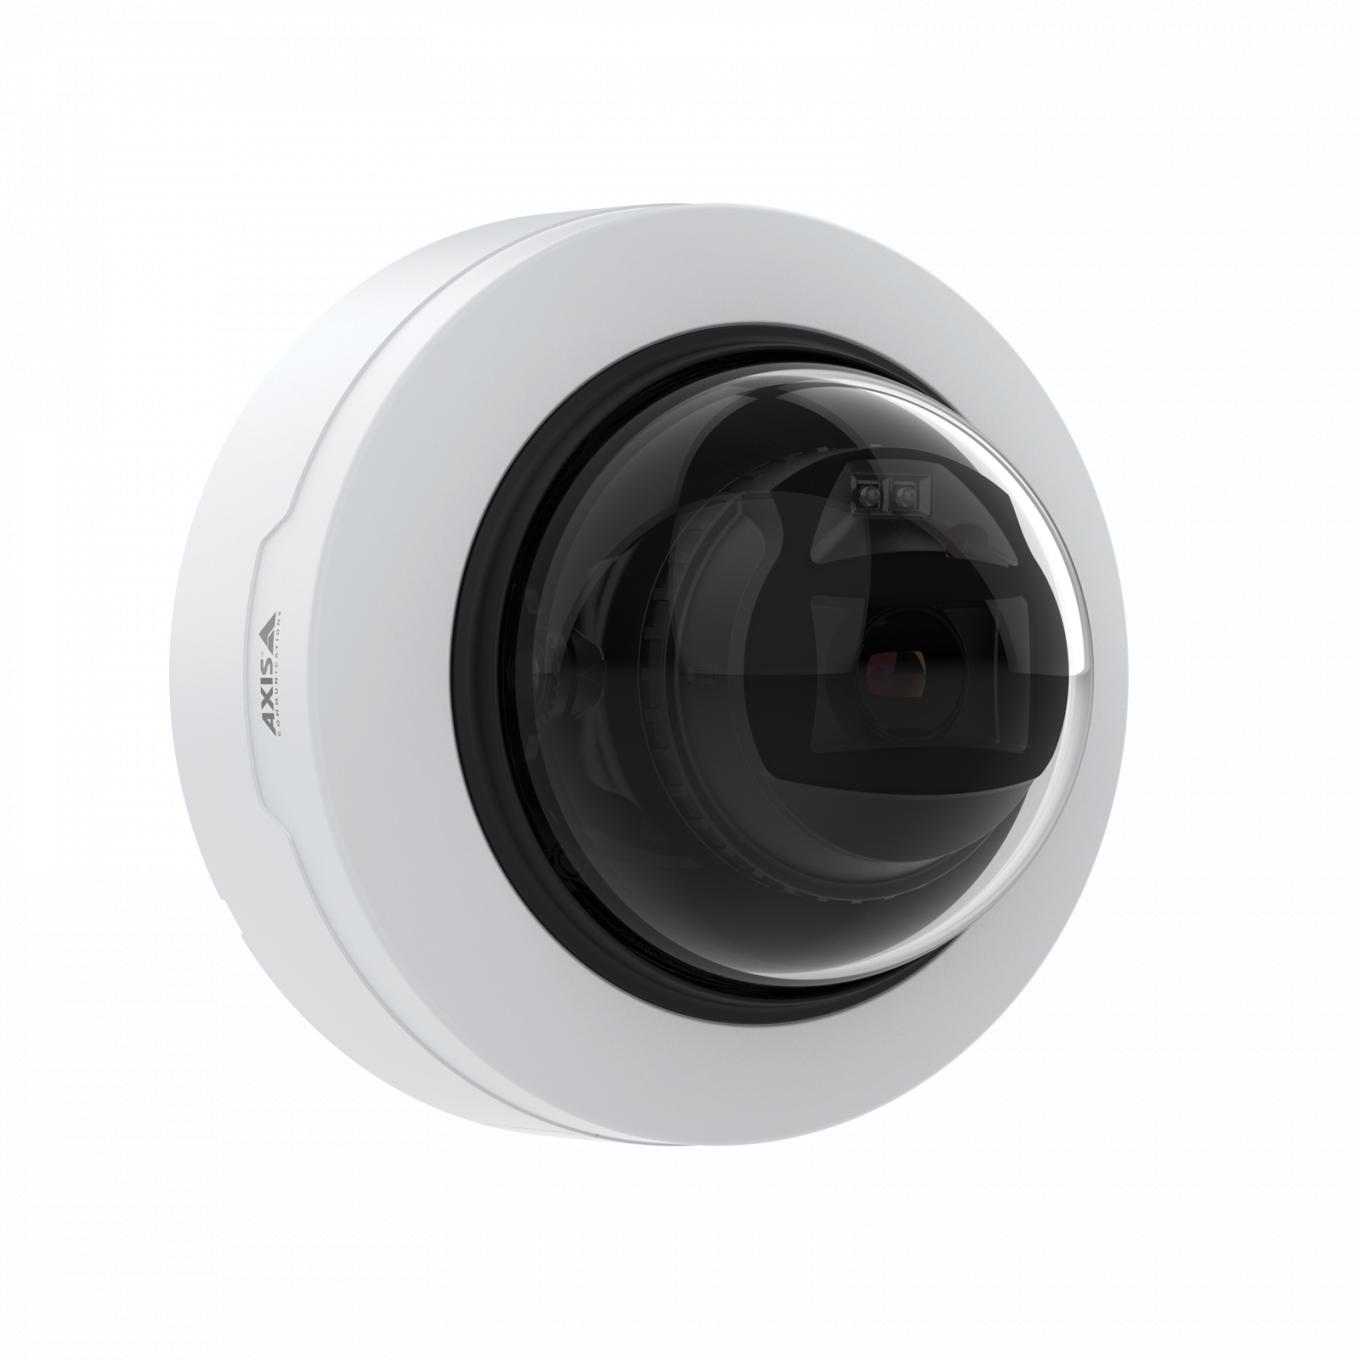 AXIS P3265-LV Dome Camera | Axis Communications